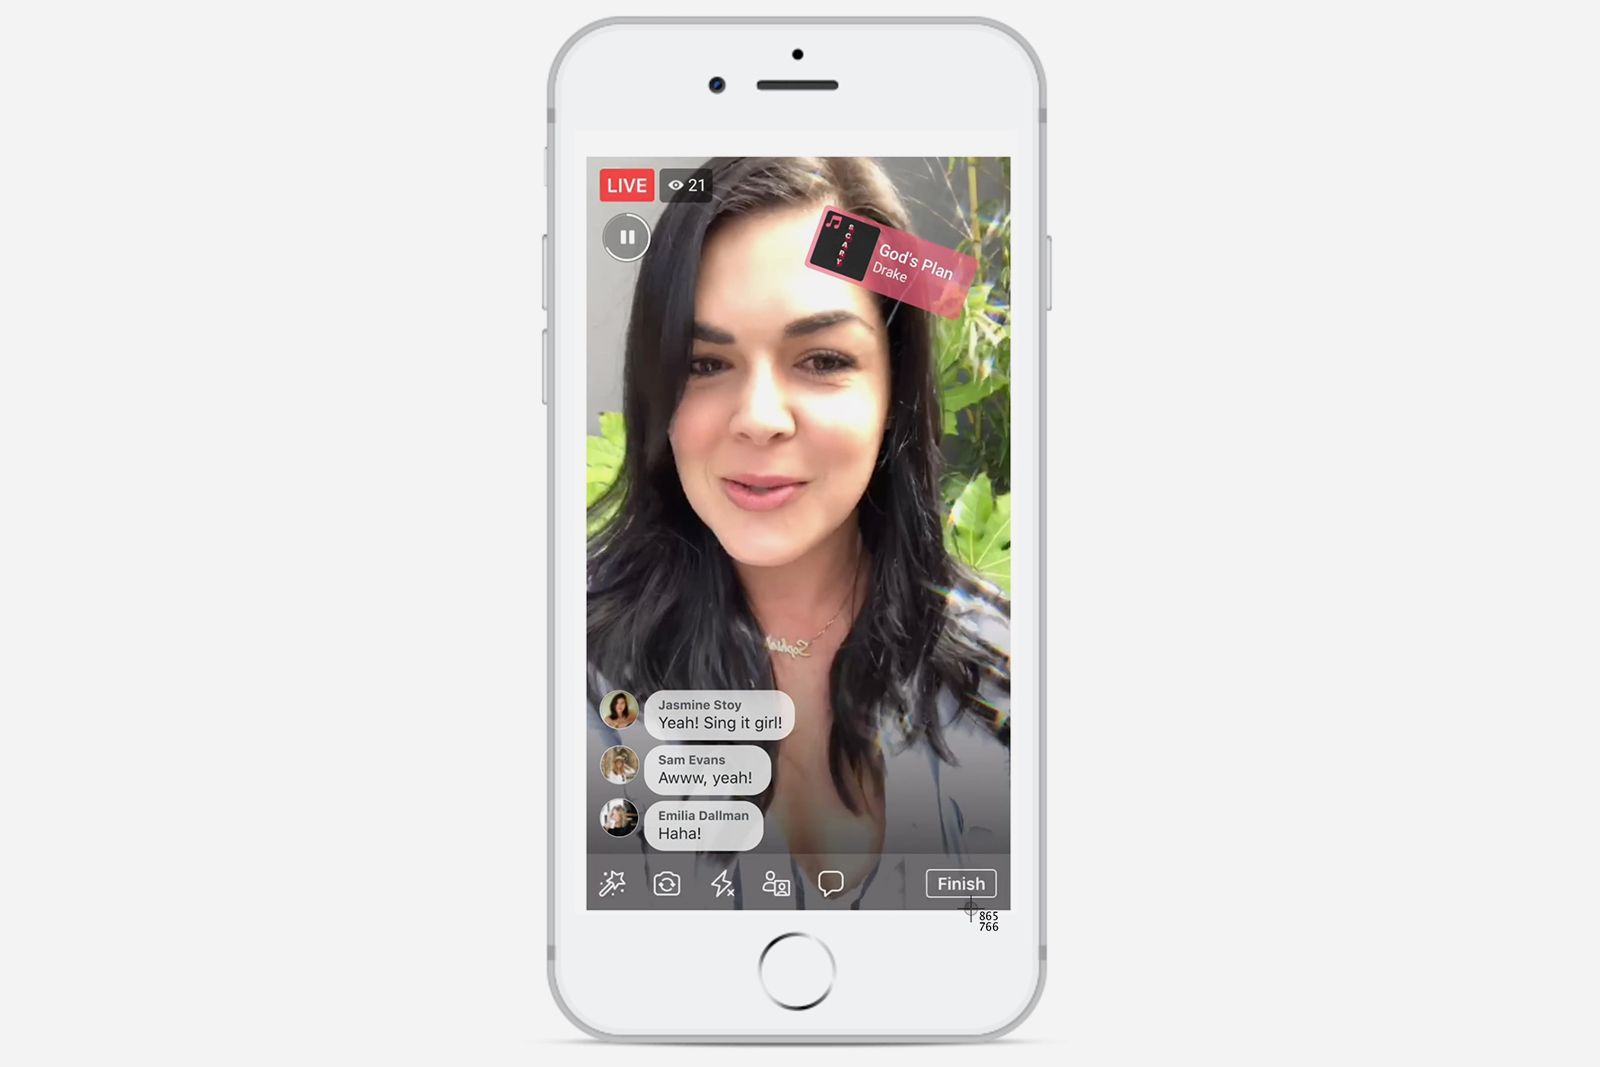 Facebook copies Musically and Dubsmash with new Lip Sync Live tool image 1